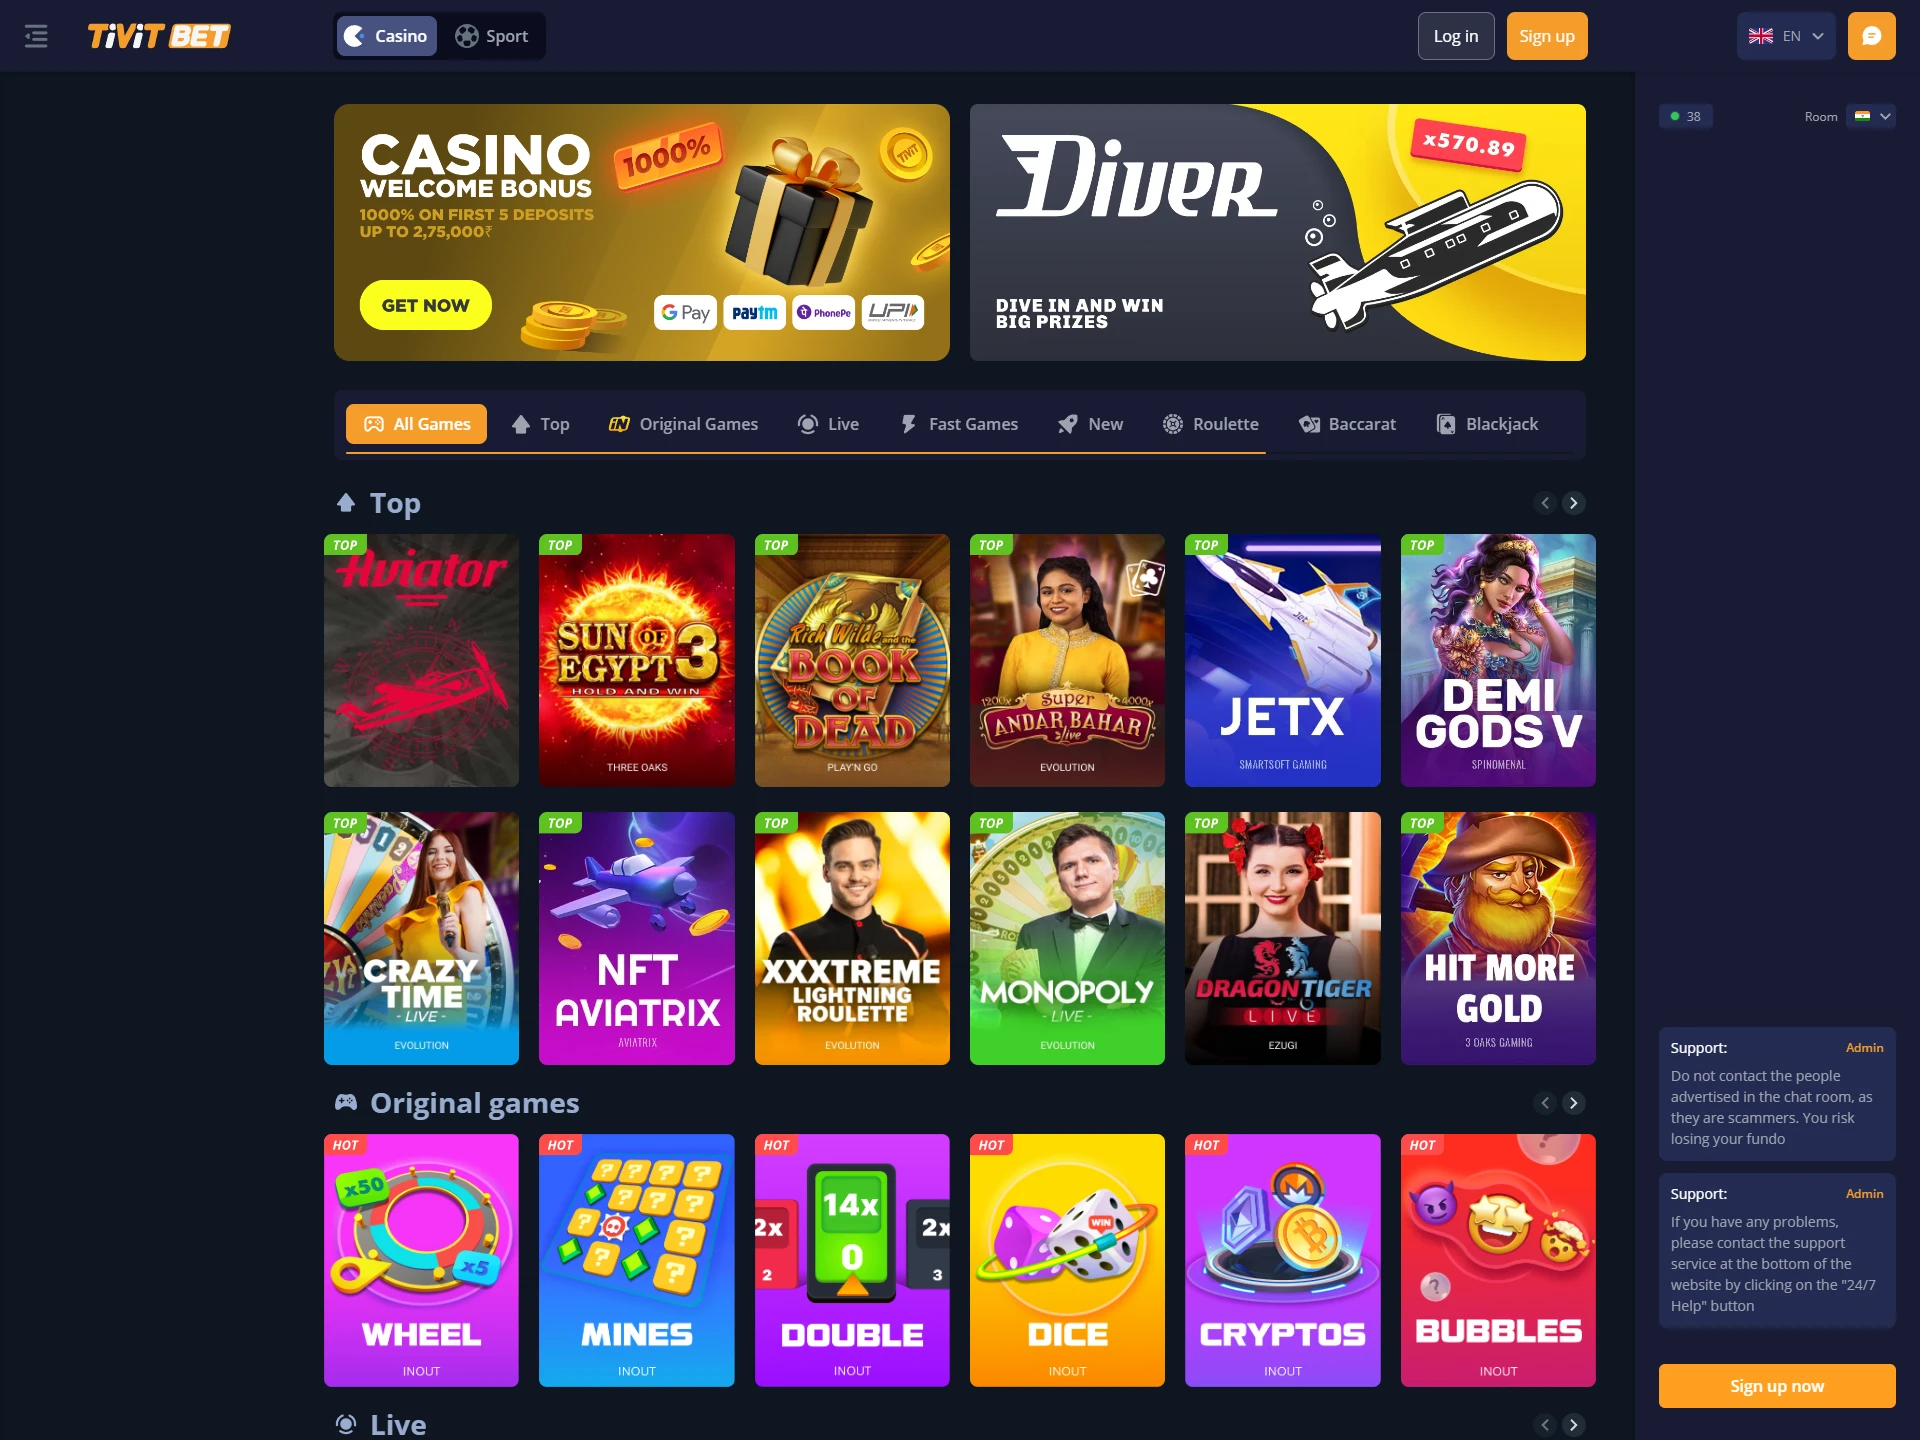 Visit the official website of Tivitbet.